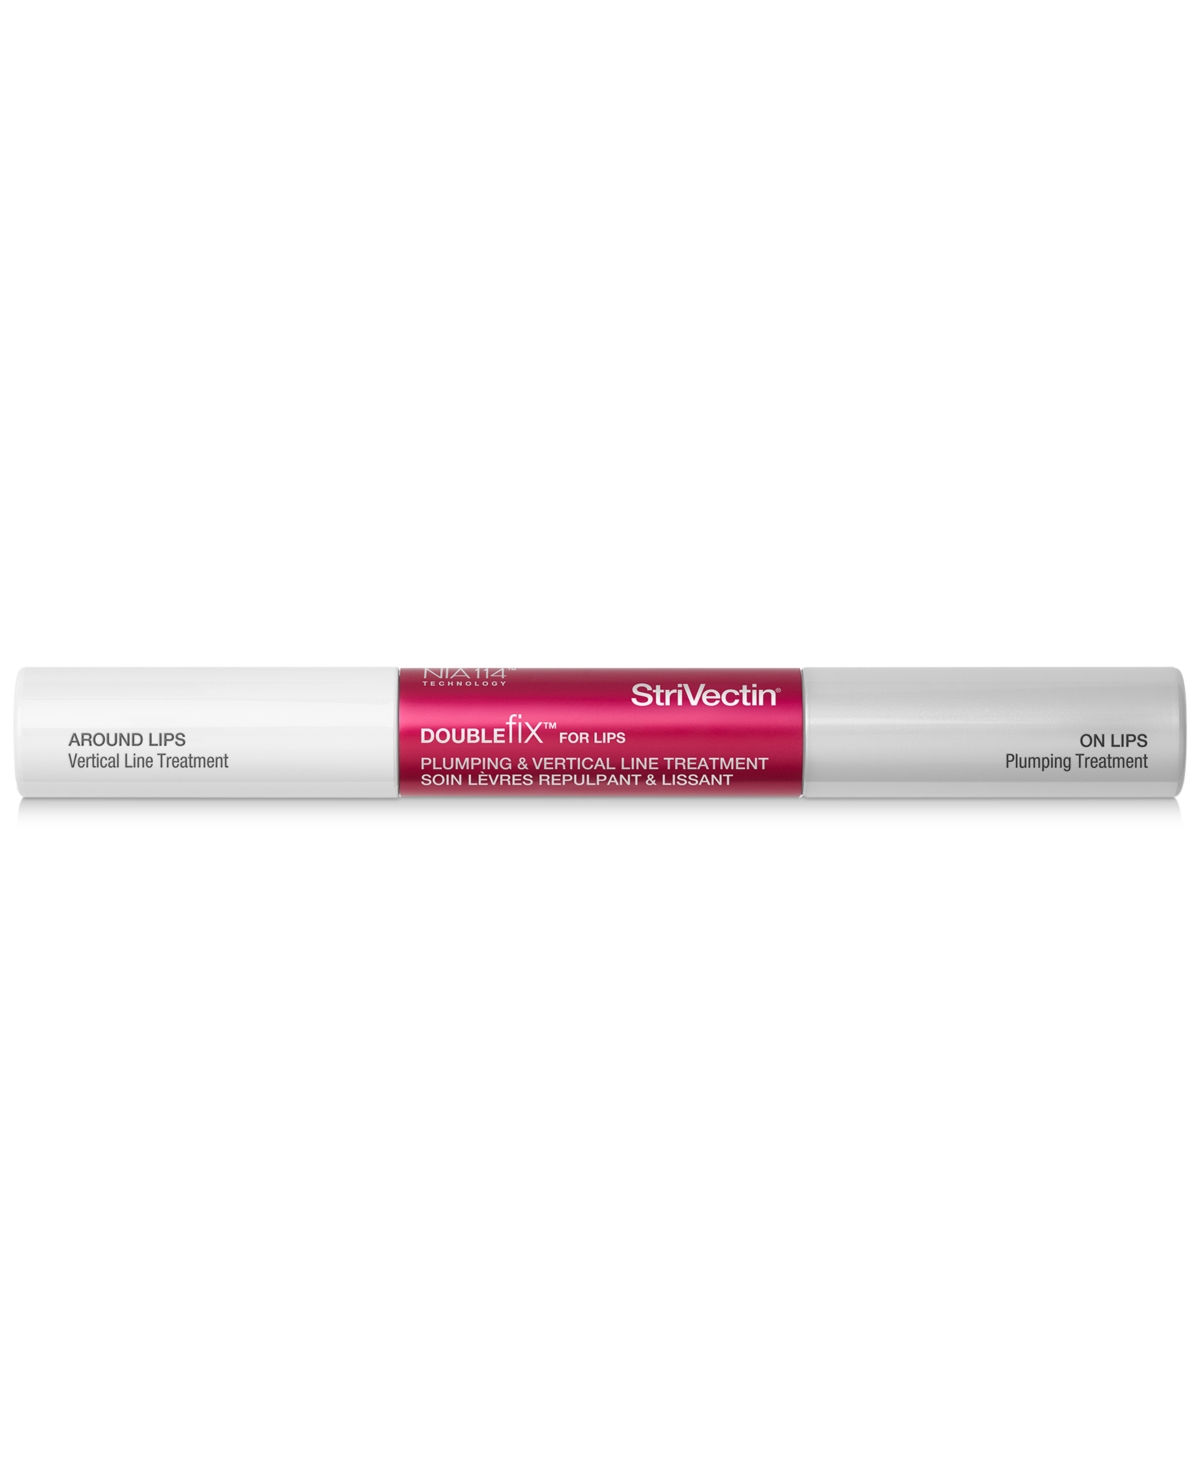 Double Fix For Lips Plumping & Vertical Line Treatment, 0.16-oz. - N/a